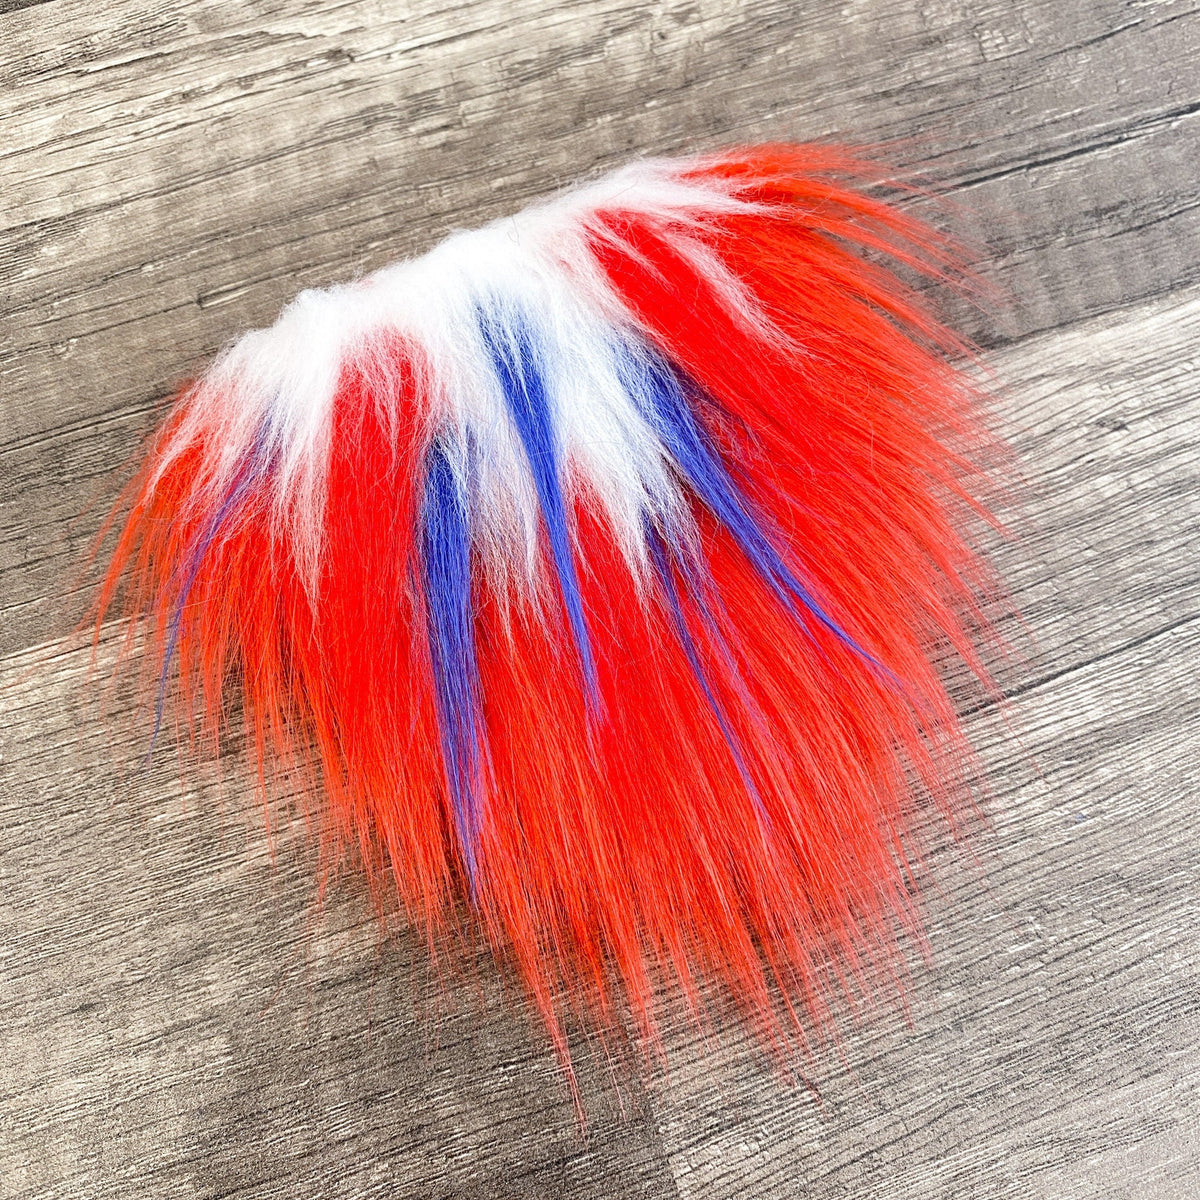 Two Piece Layered Gnome Beard - Patriotic Spike Over Straight Red